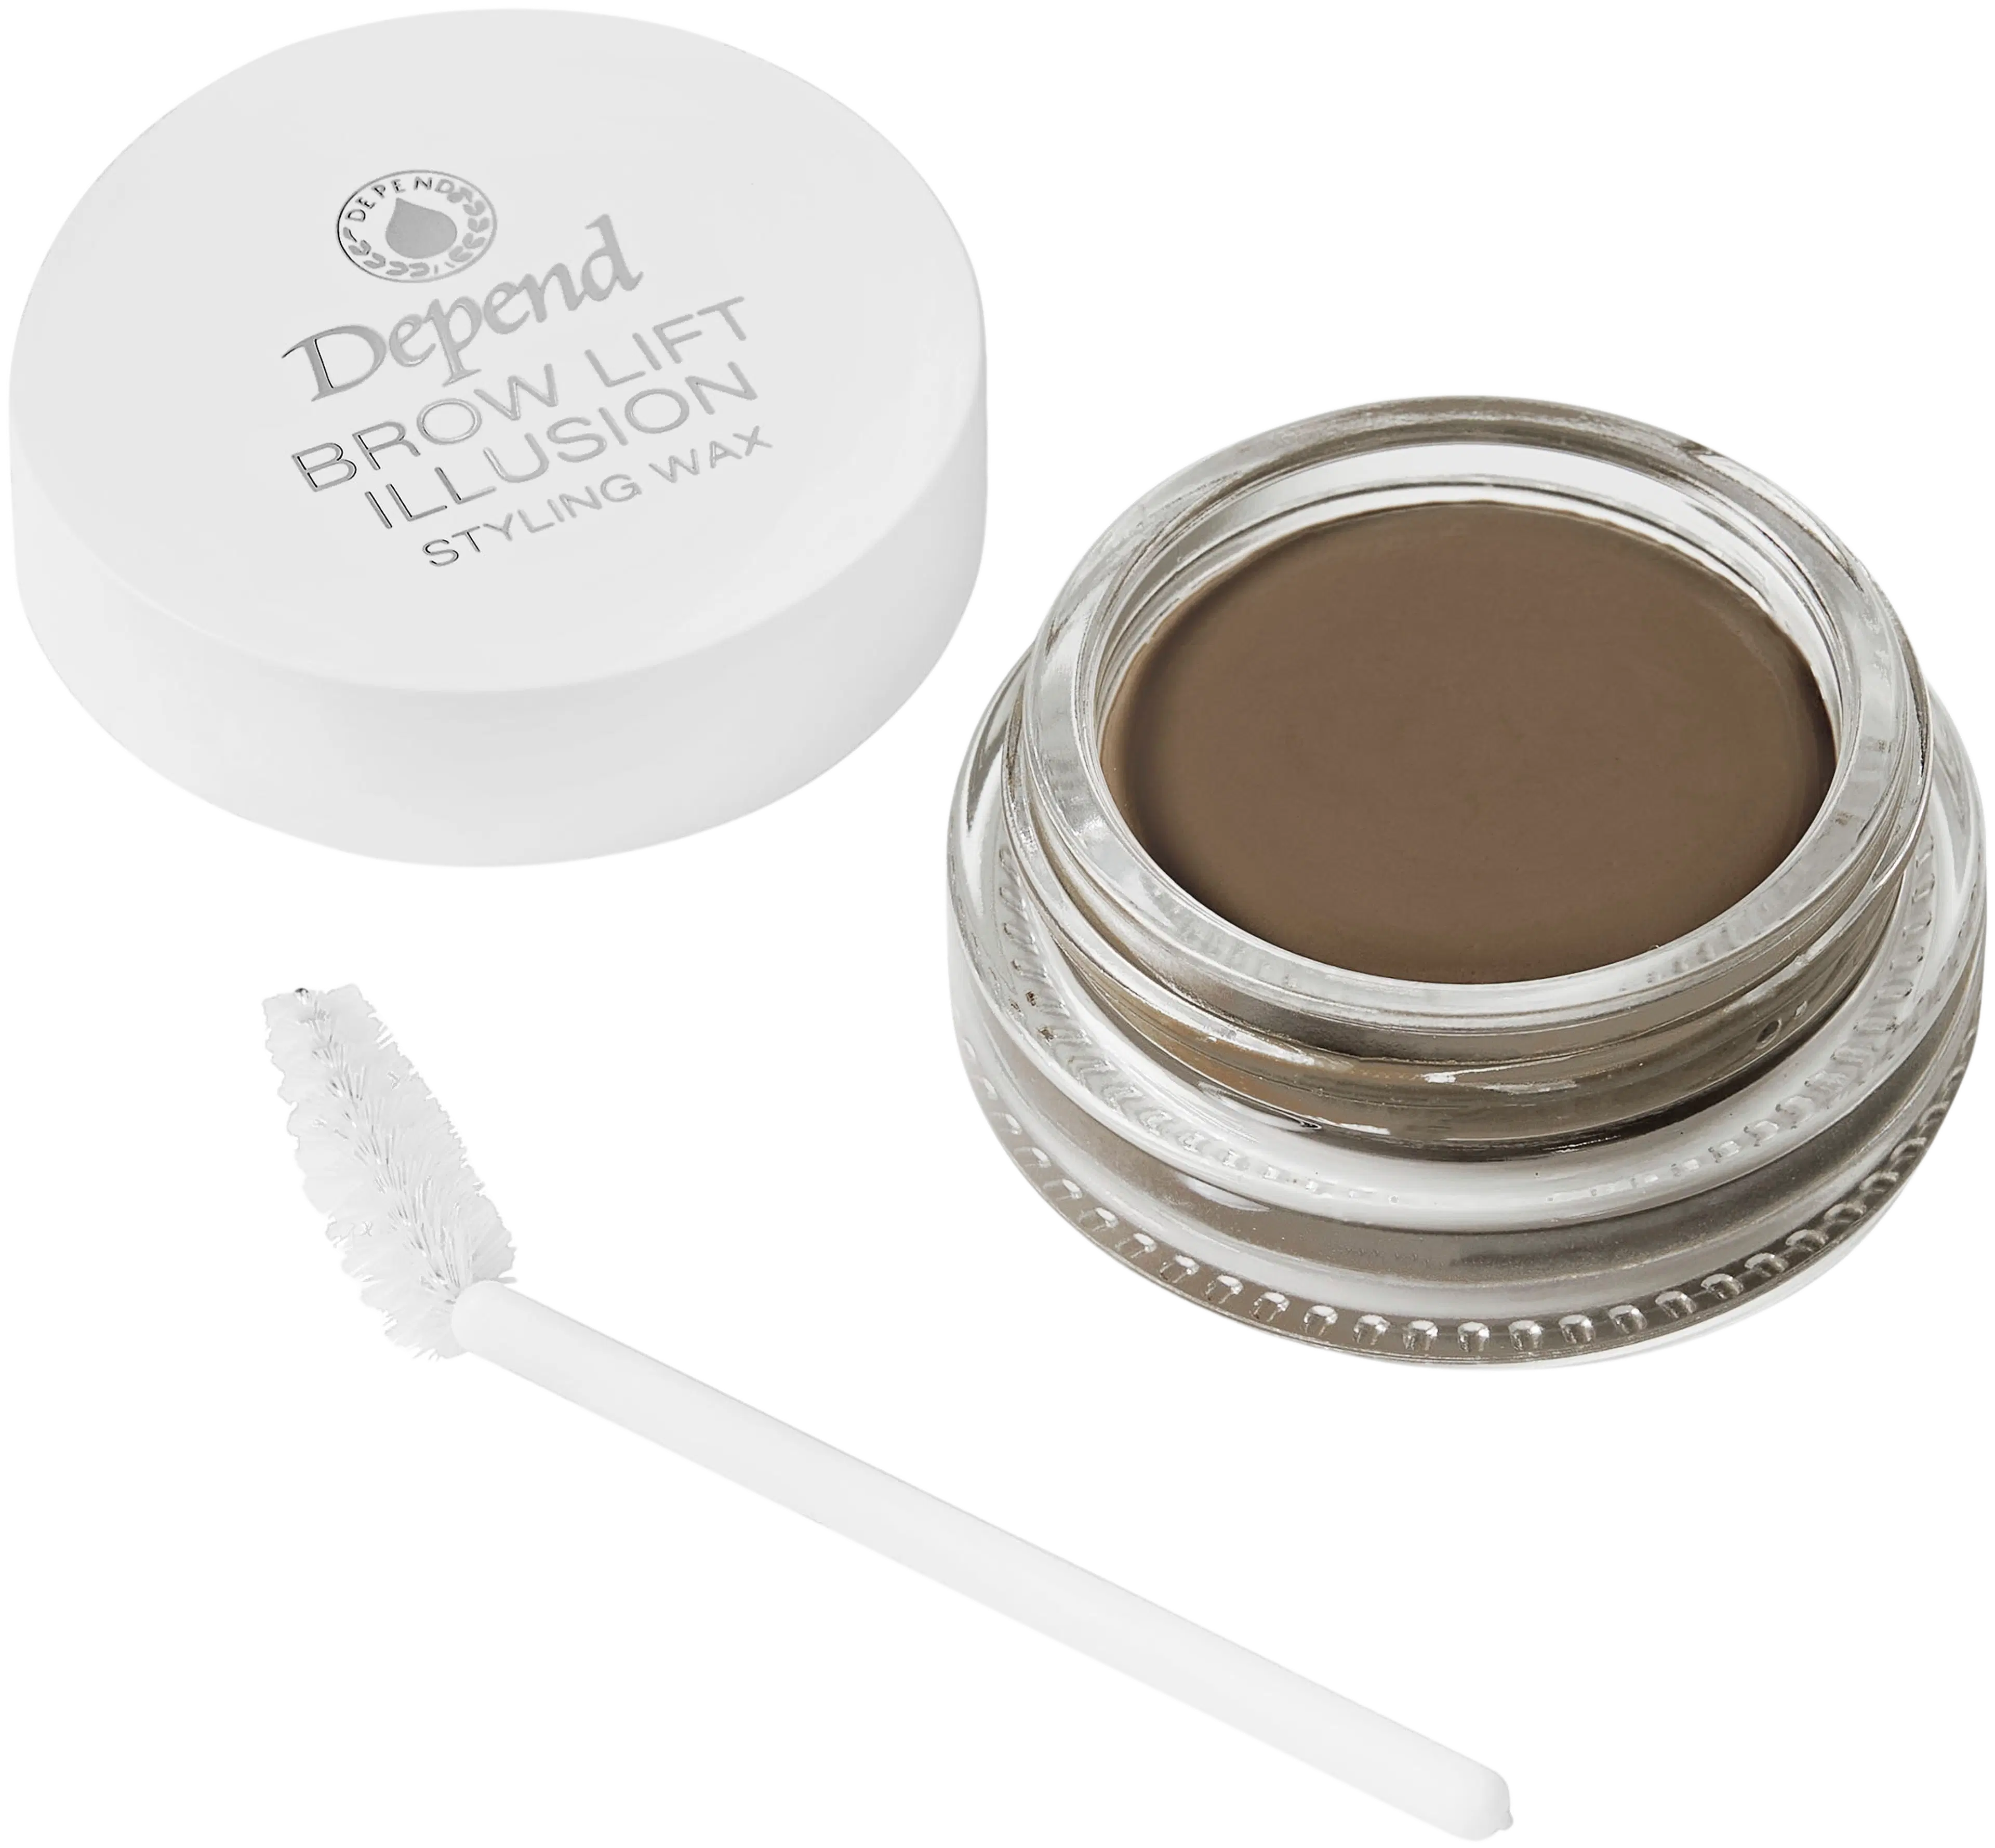 Depend Perfect Eye Brow Lift Illusion Coloured Styling Wax Soft Brown 5g nr 4973